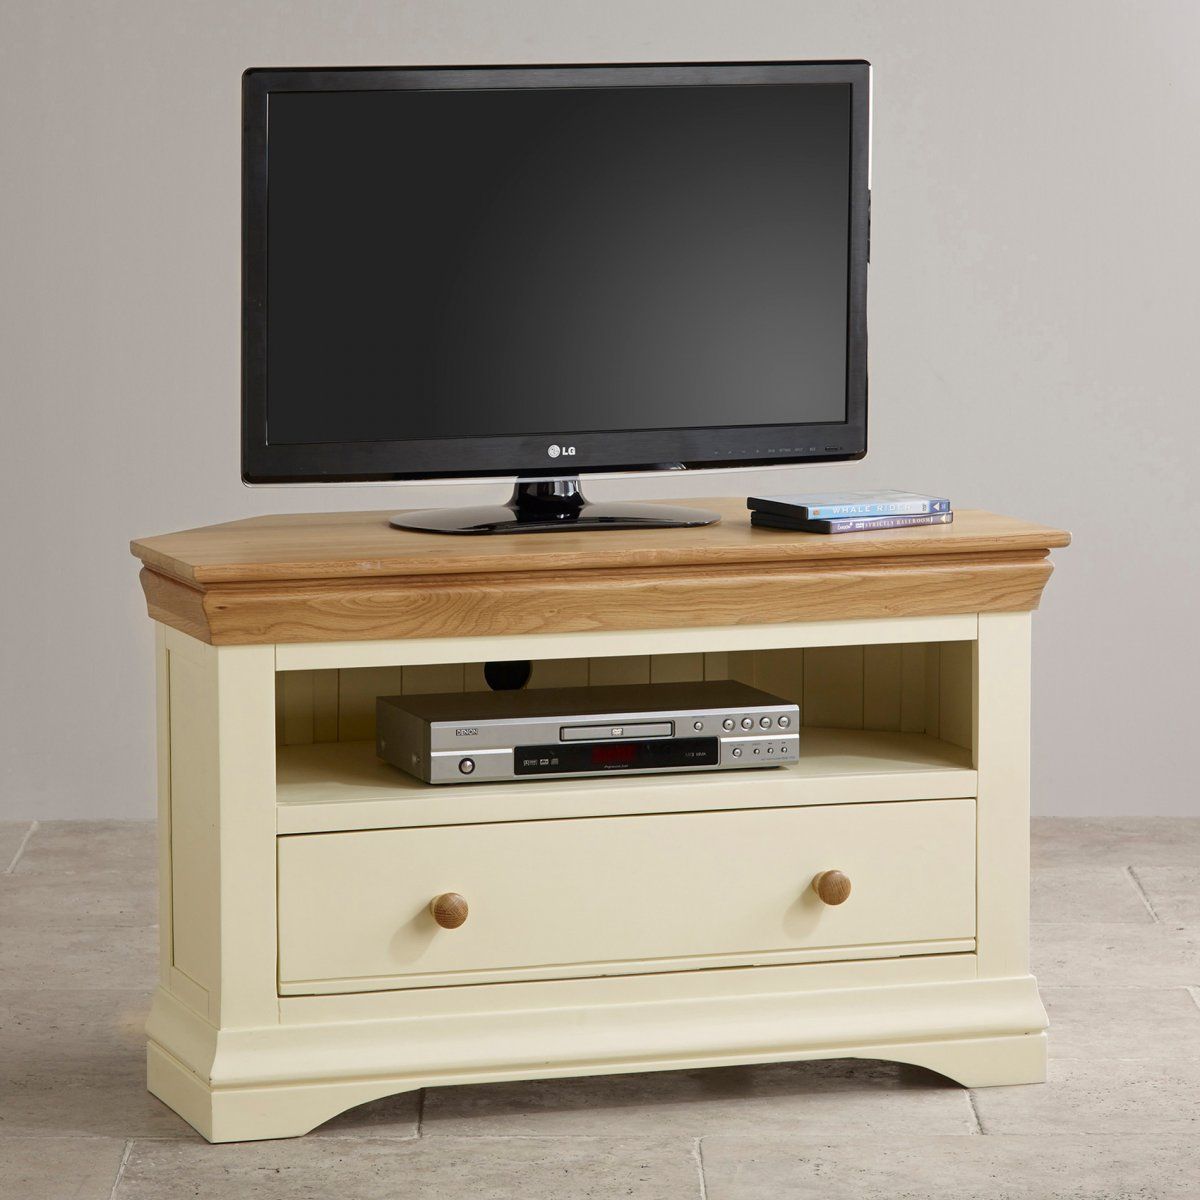 Country Cottage Natural Oak Corner Tv Cabinet – Cream Painted With Cream Corner Tv Stands (View 10 of 15)